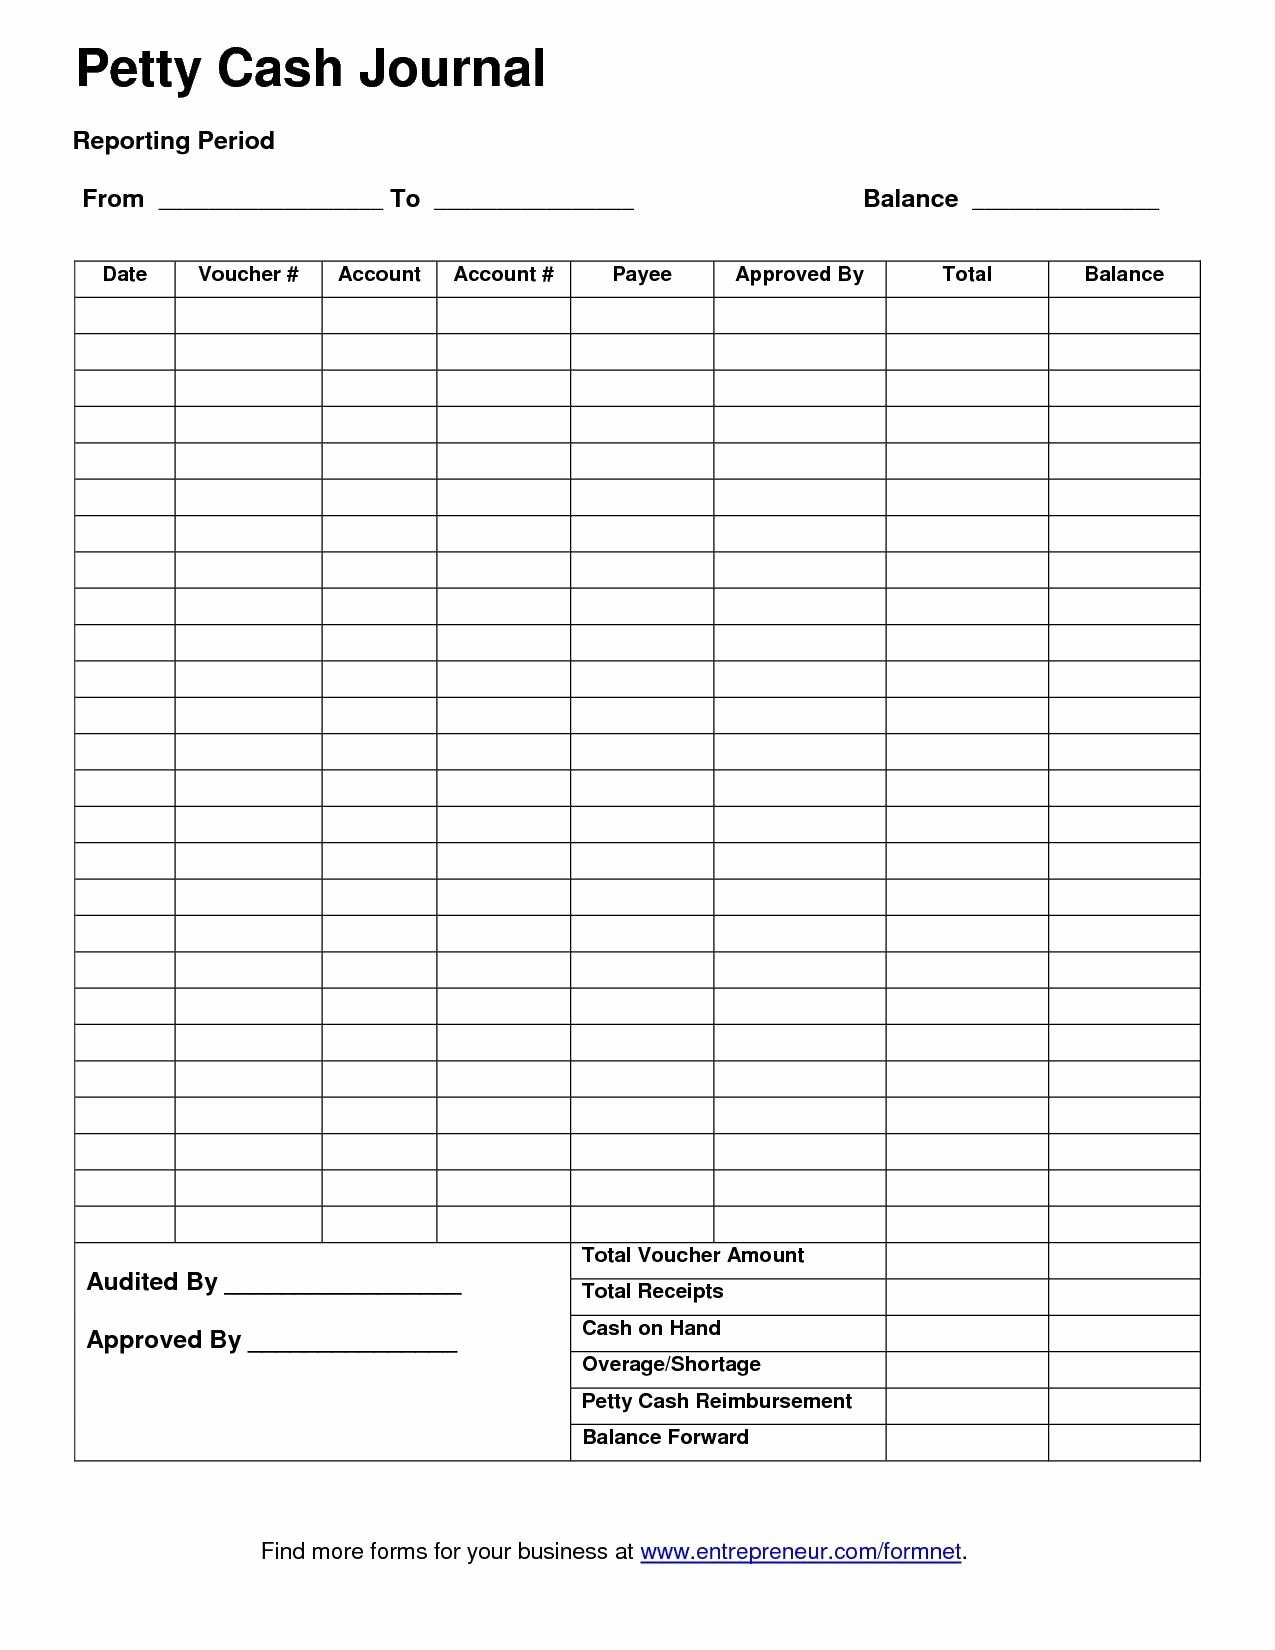 Daily Cash Report Template Excel Fresh Template for Petty Cash Petty Cash Report Template Excel